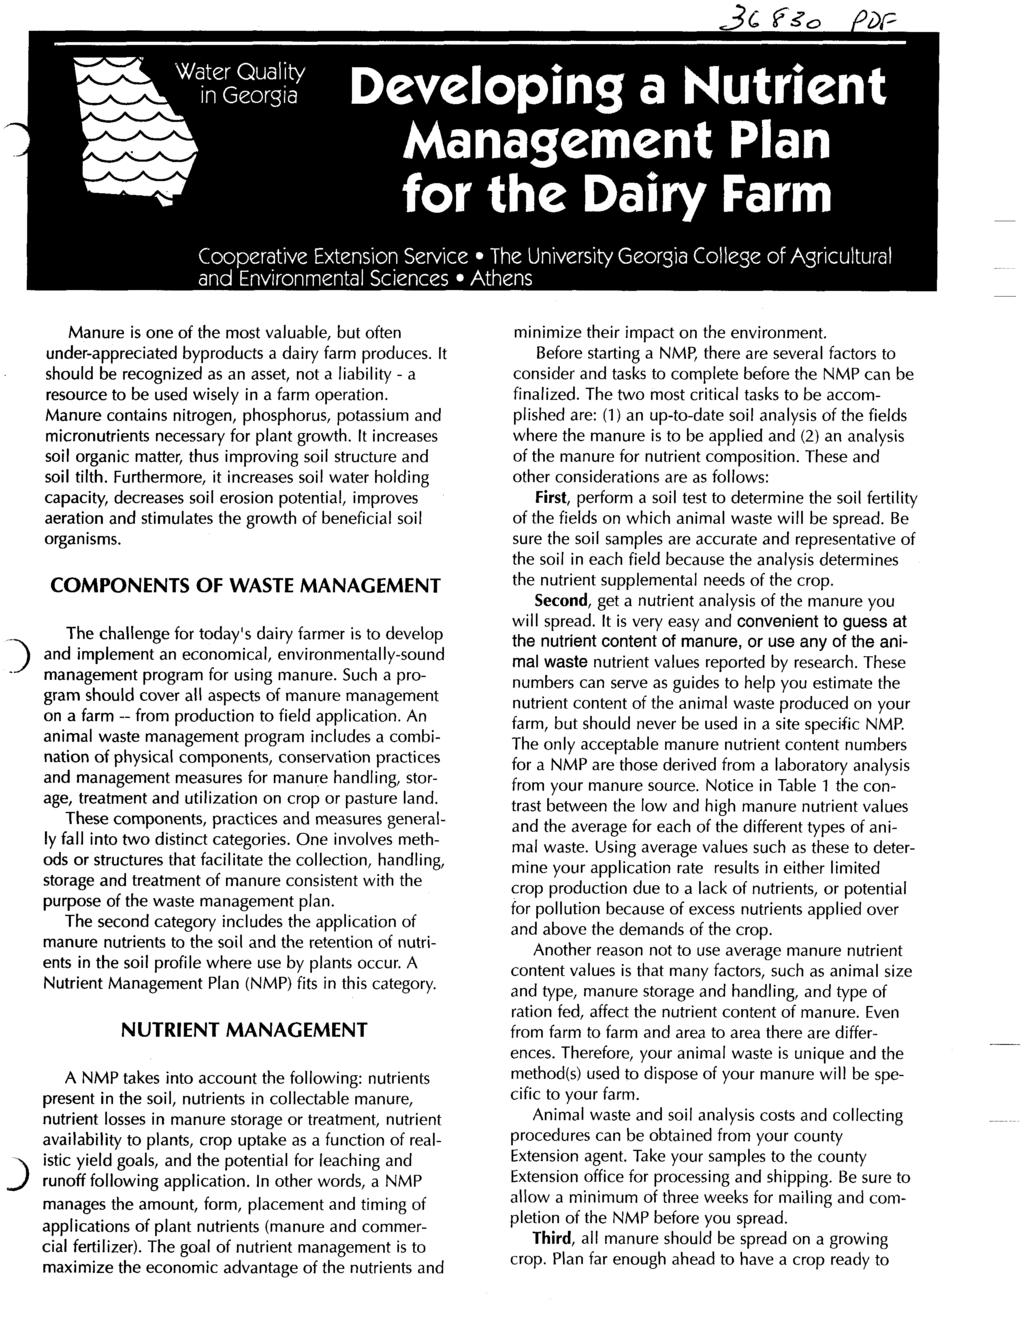 I Manure is one of the most valuable, but often under-appreciated byproducts a dairy farm produces.